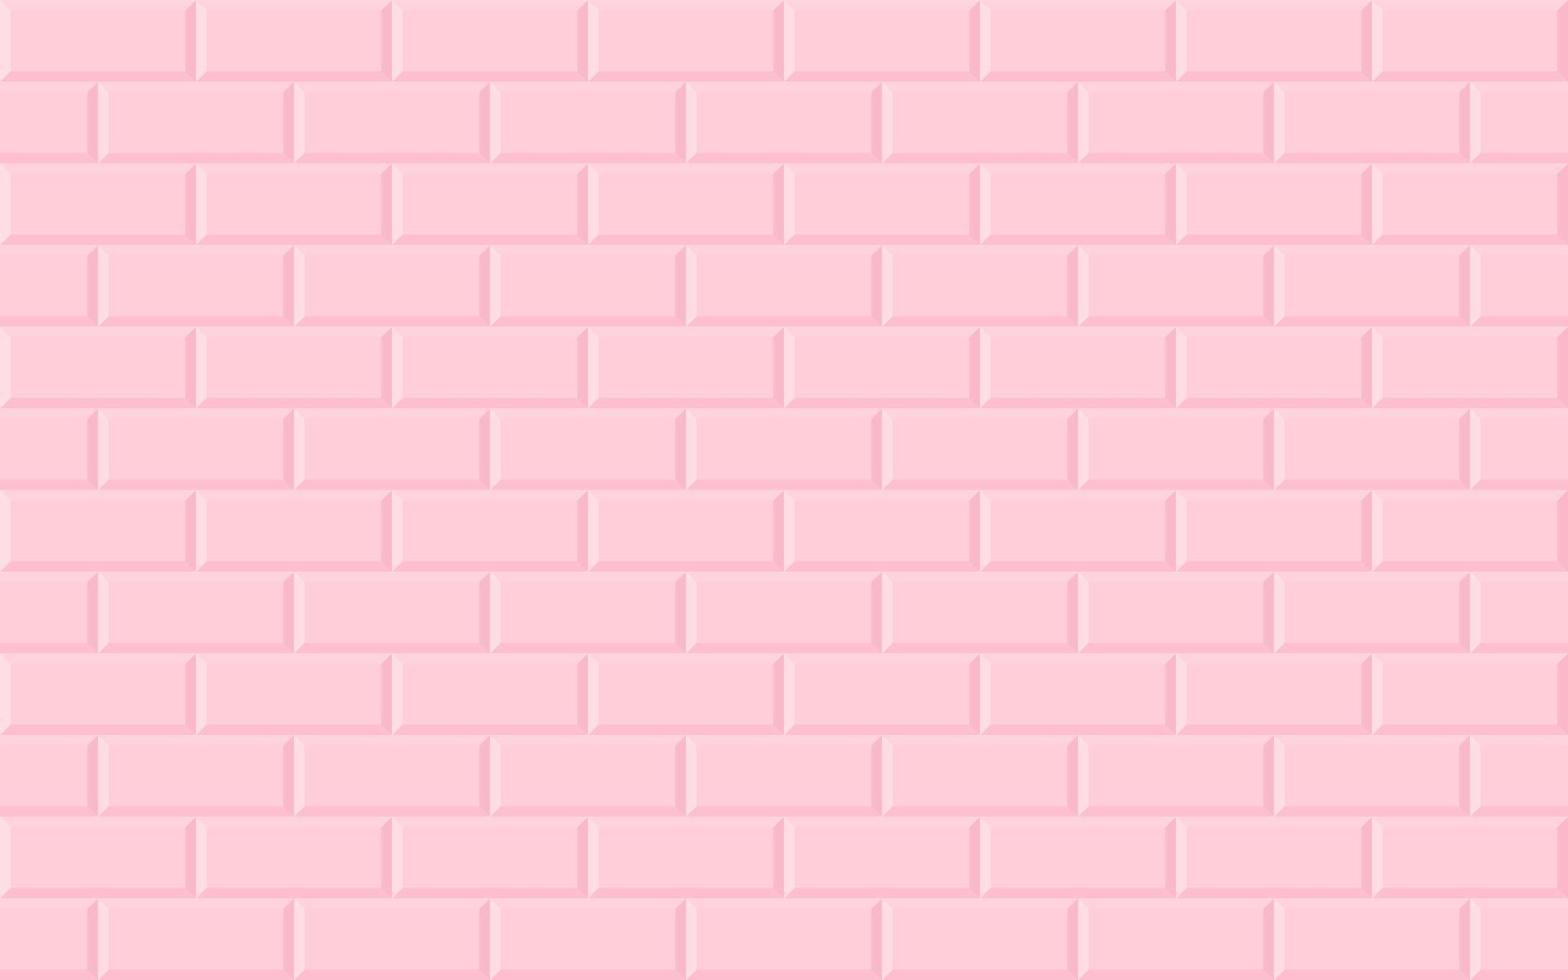 Pink abstract background with brick texture wall design. Seamless vector pattern. illustration